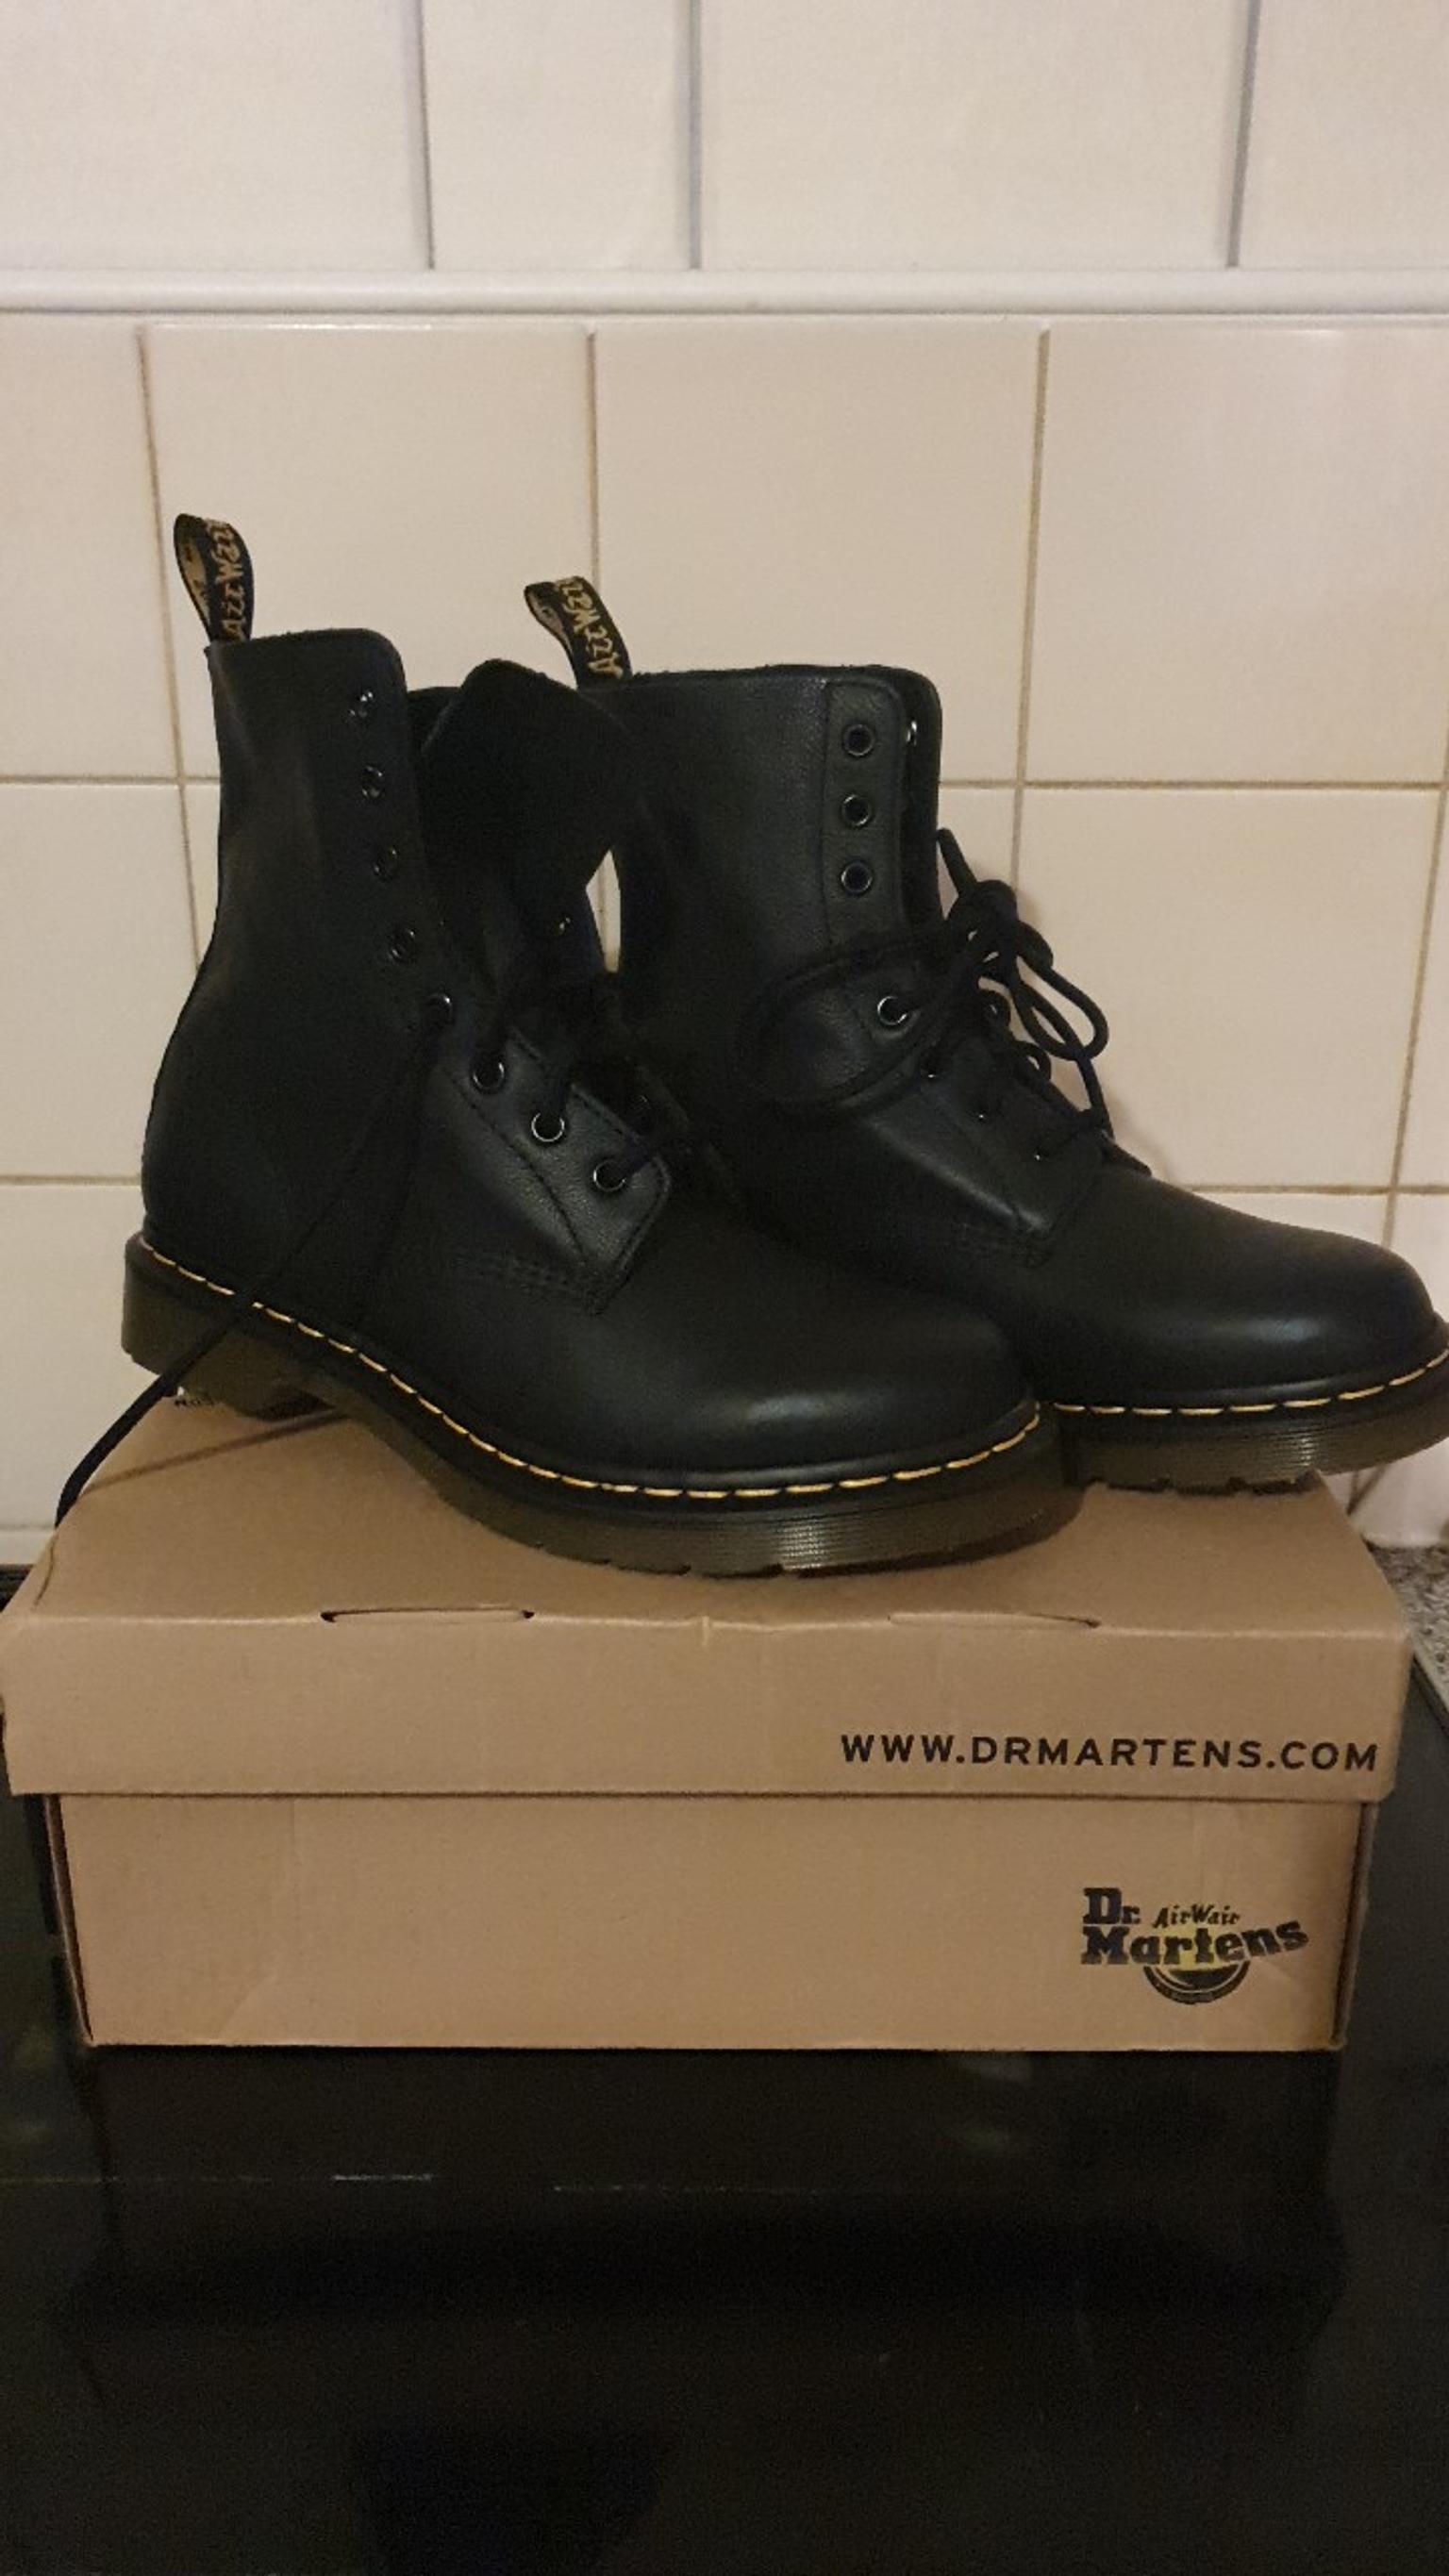 dr airwair martens boots size 8 in WS4 Walsall for £100.00 for sale